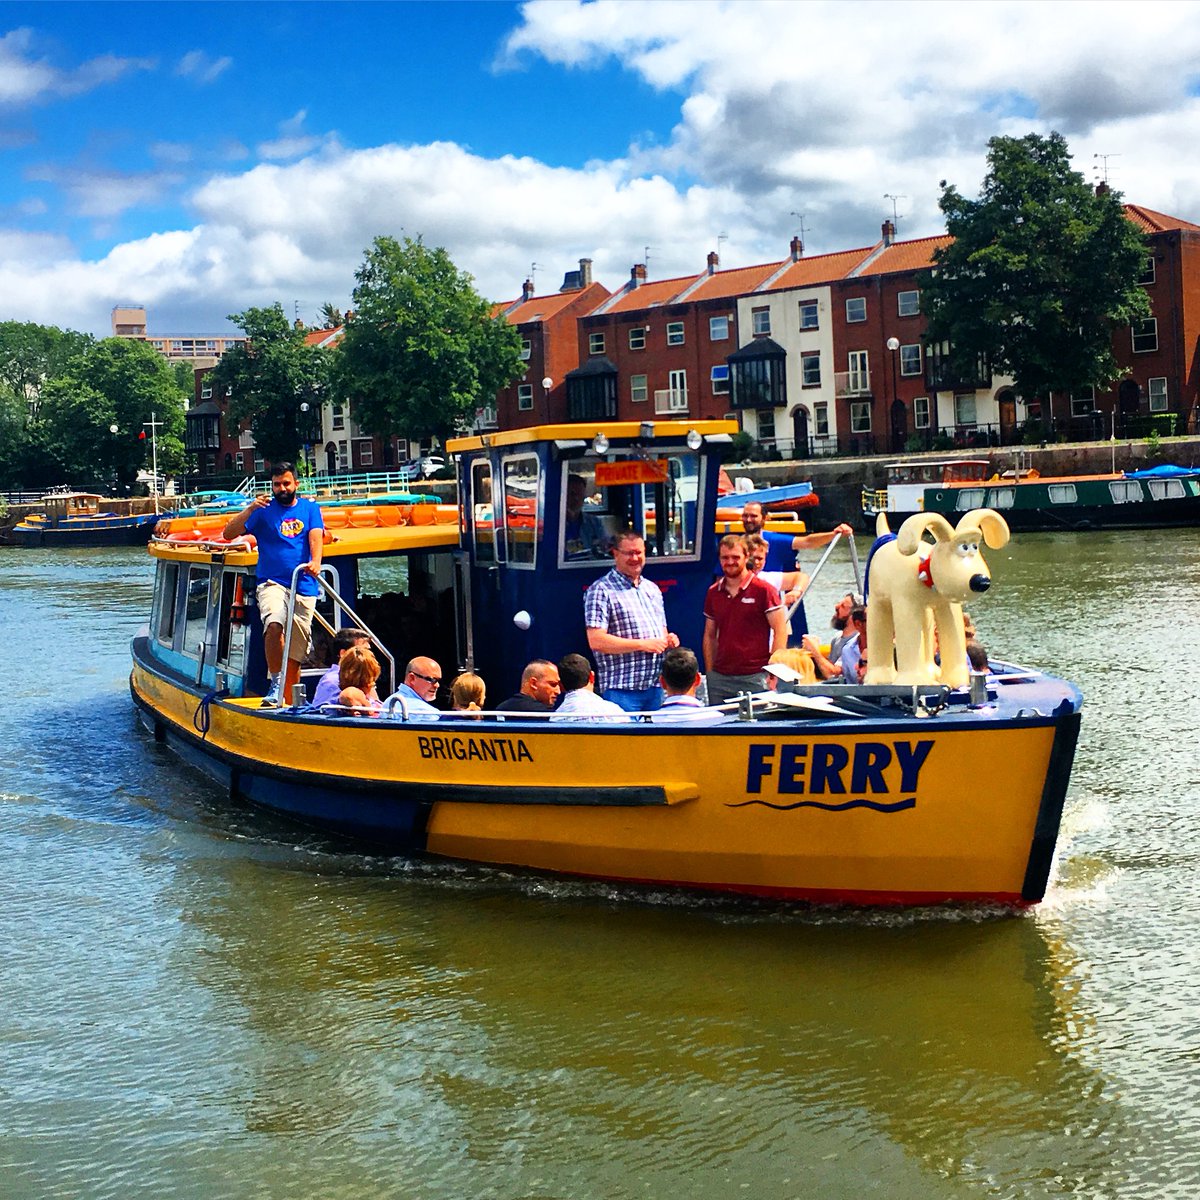 Underfall Yard and Bristol Ferry have teamed up to offer a free virtual tour of the Harbour on April 20th. To join please register on Eventbrite: bit.ly/2QYOKYO 
@aliveactivities @VisitBristol @whatsonbristol @ageukbristol @BabBristol @BBCBristol @mshedbristol